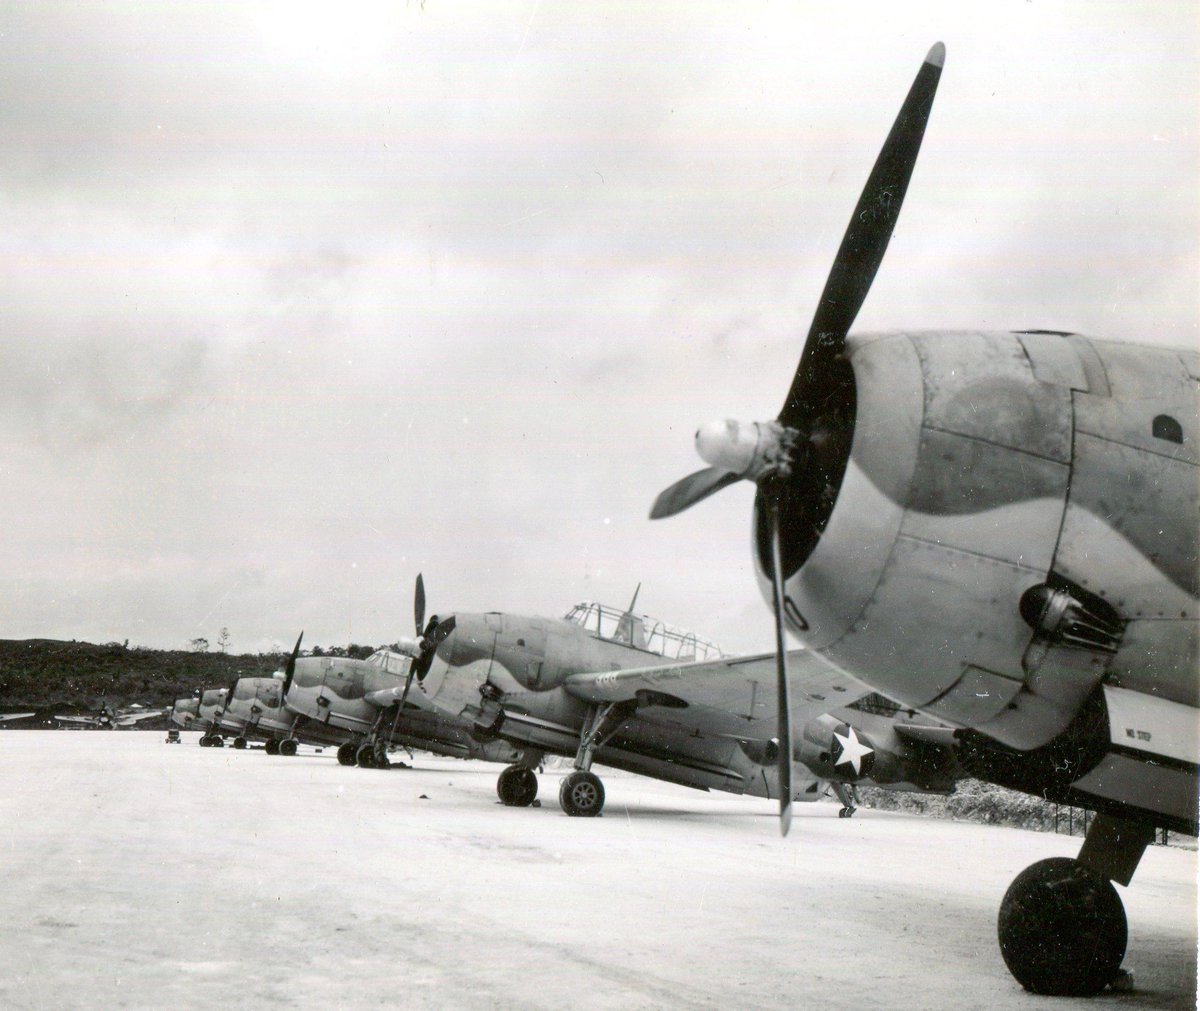 Grumman TBF Avengers on the coral ramp at Munda airfield in New Georgia, Solomon Islands, in 1943. #History #WWII